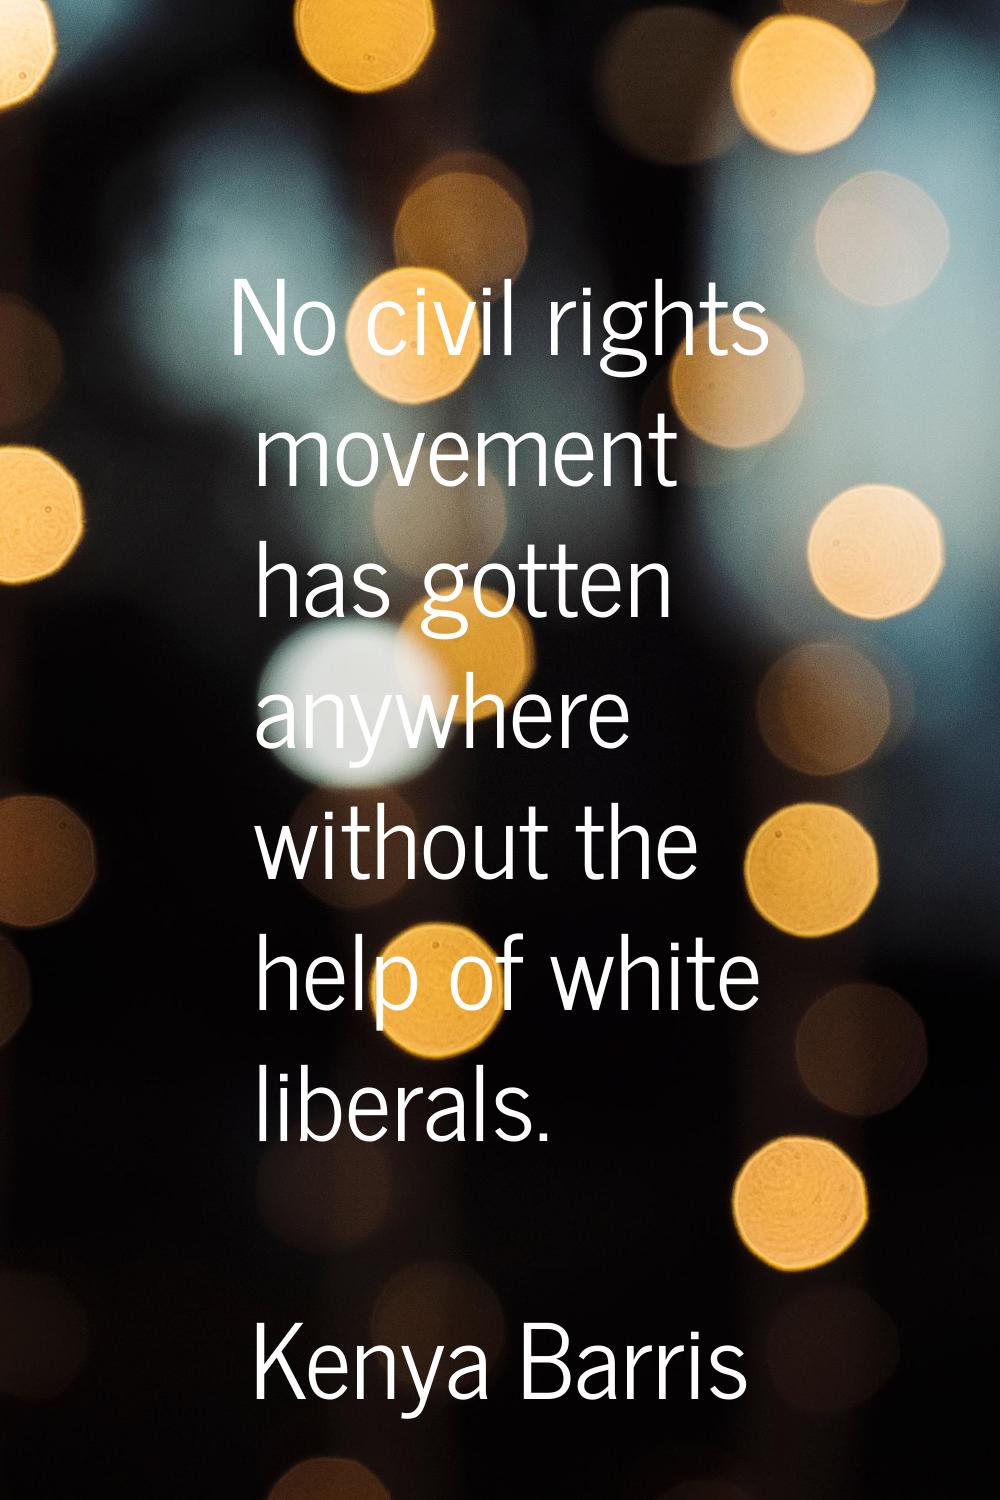 No civil rights movement has gotten anywhere without the help of white liberals.